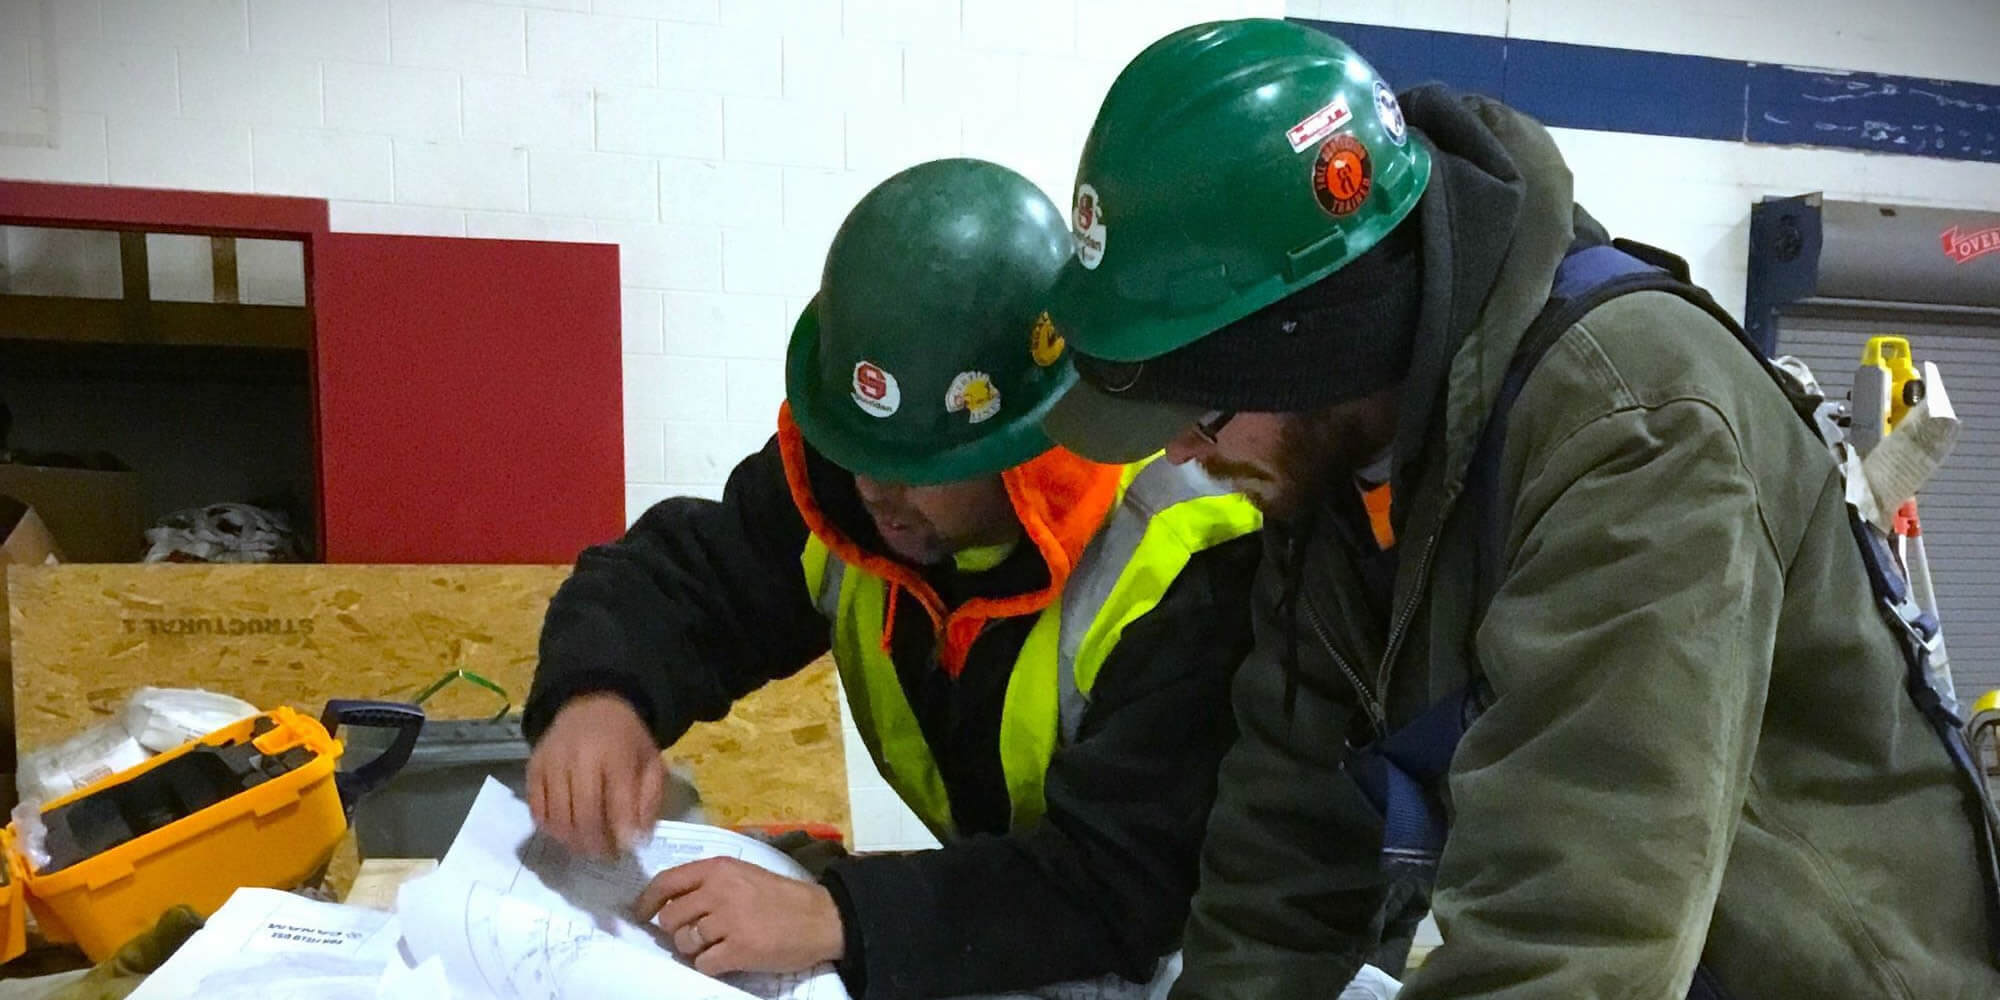 Construction team members reviewing an engineering design.